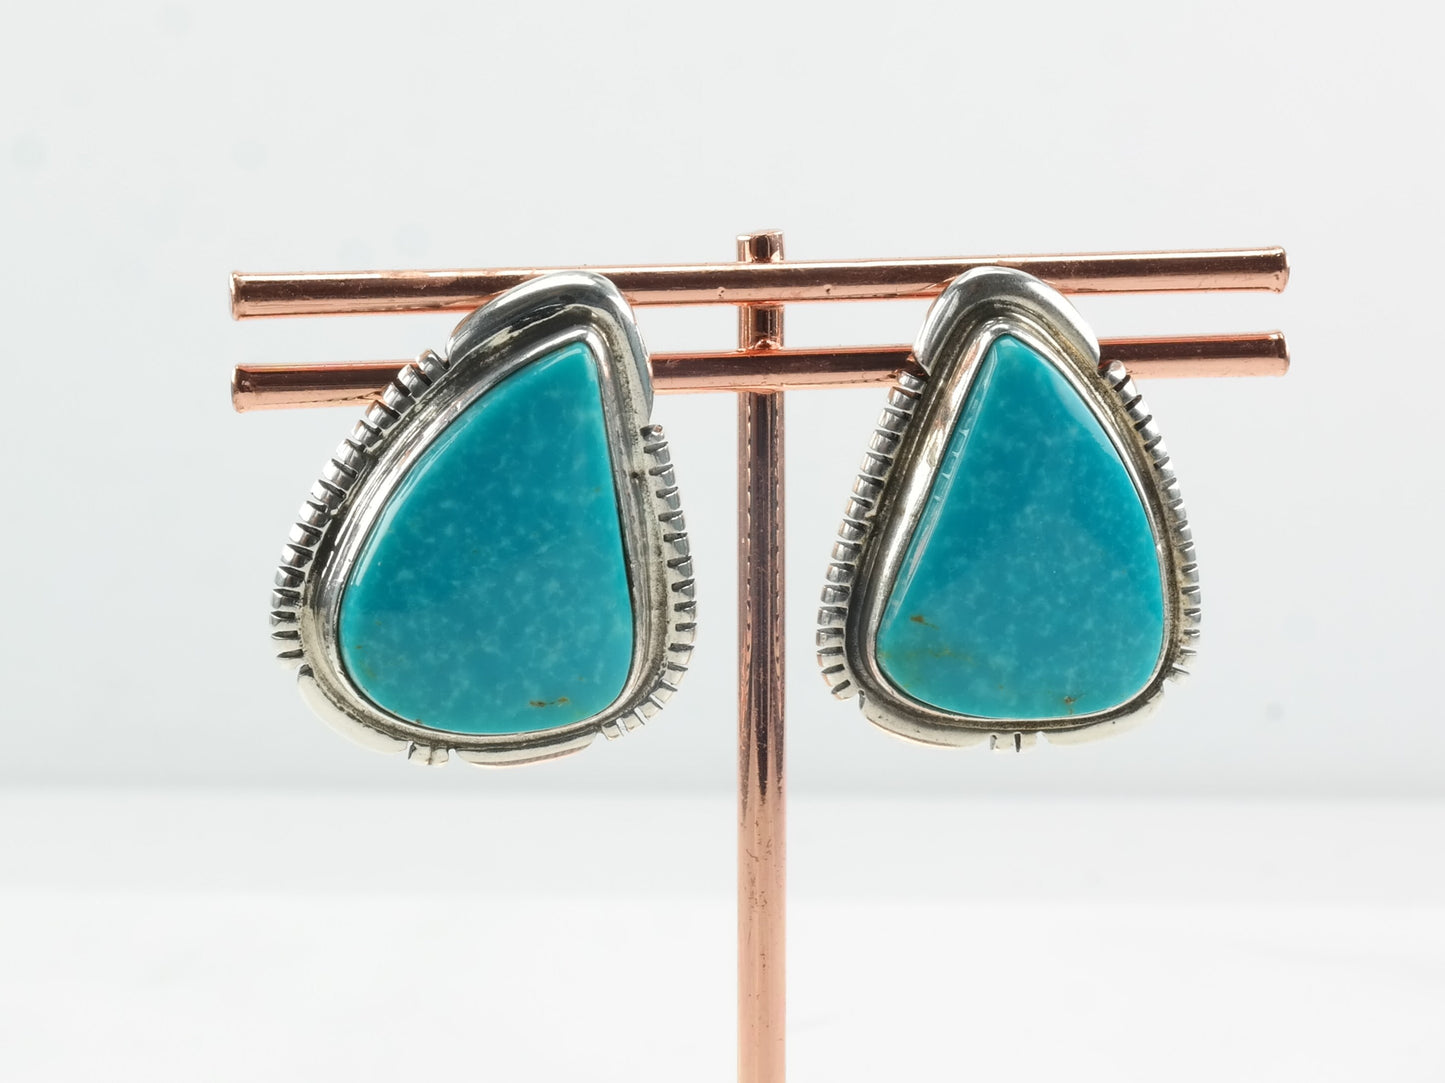 Native American Navajo Sterling Silver Turquoise Triangle Earrings Stud